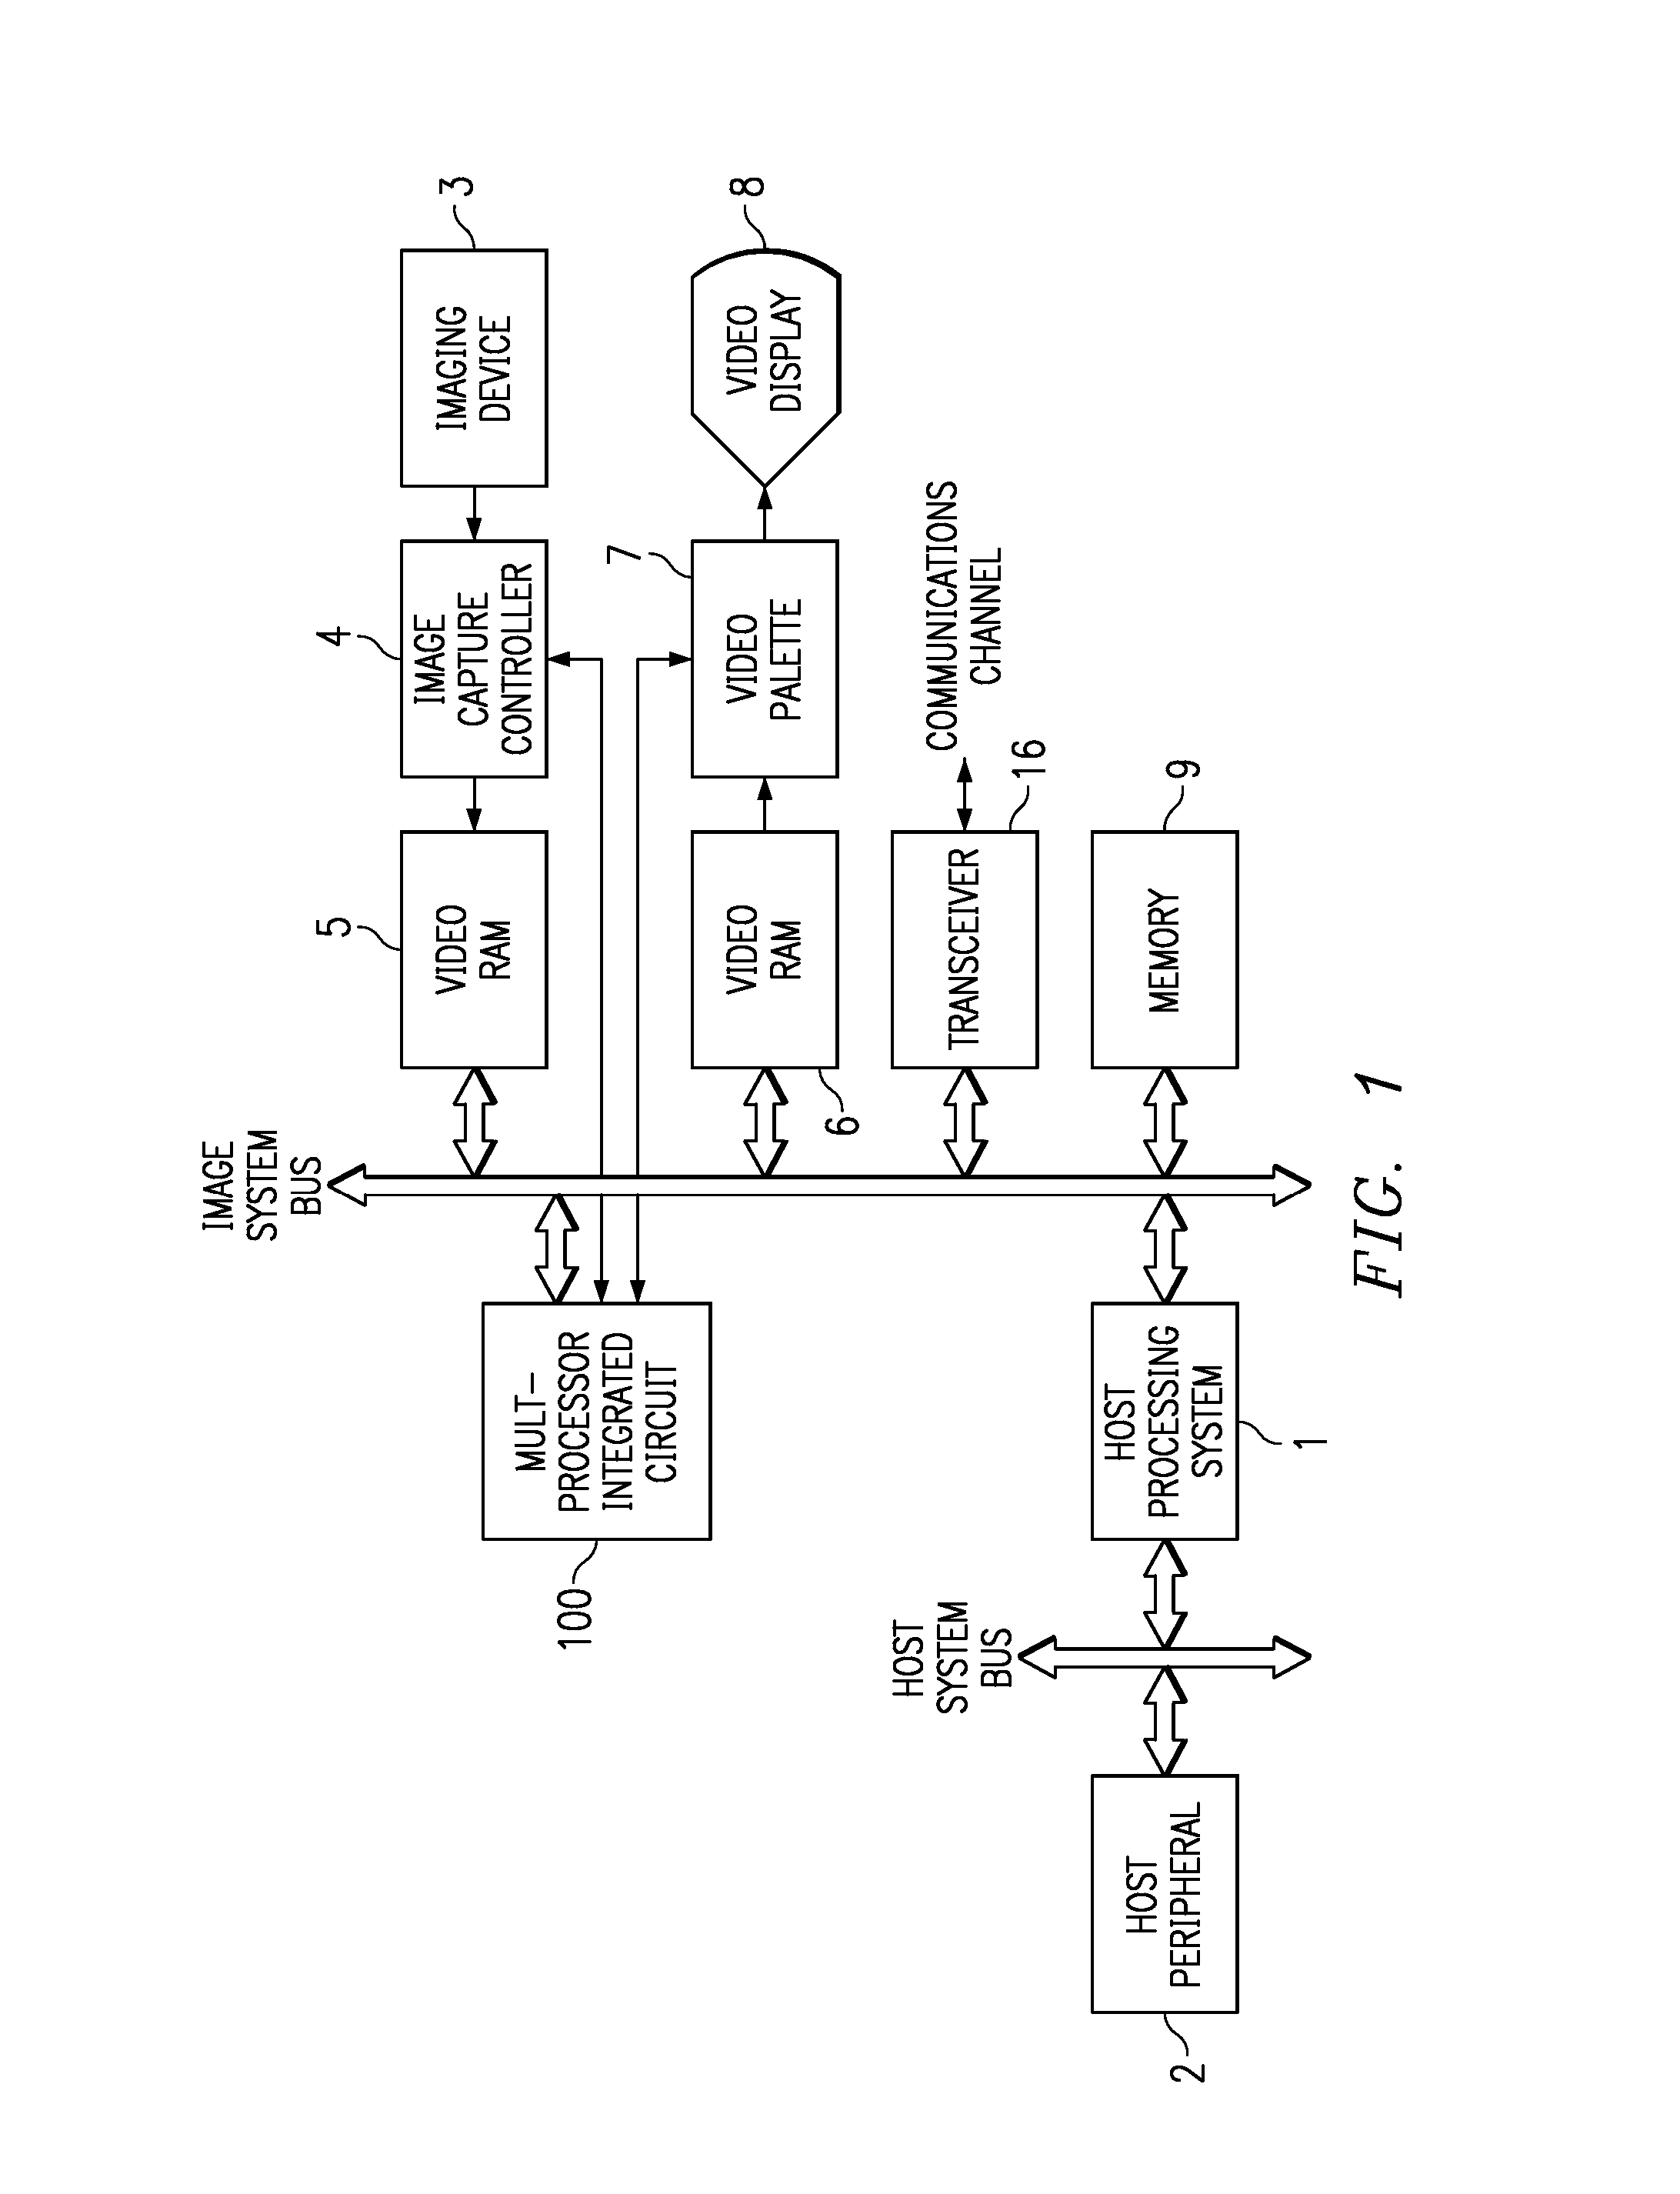 Long Instruction Word Controlling Plural Independent Processor Operations